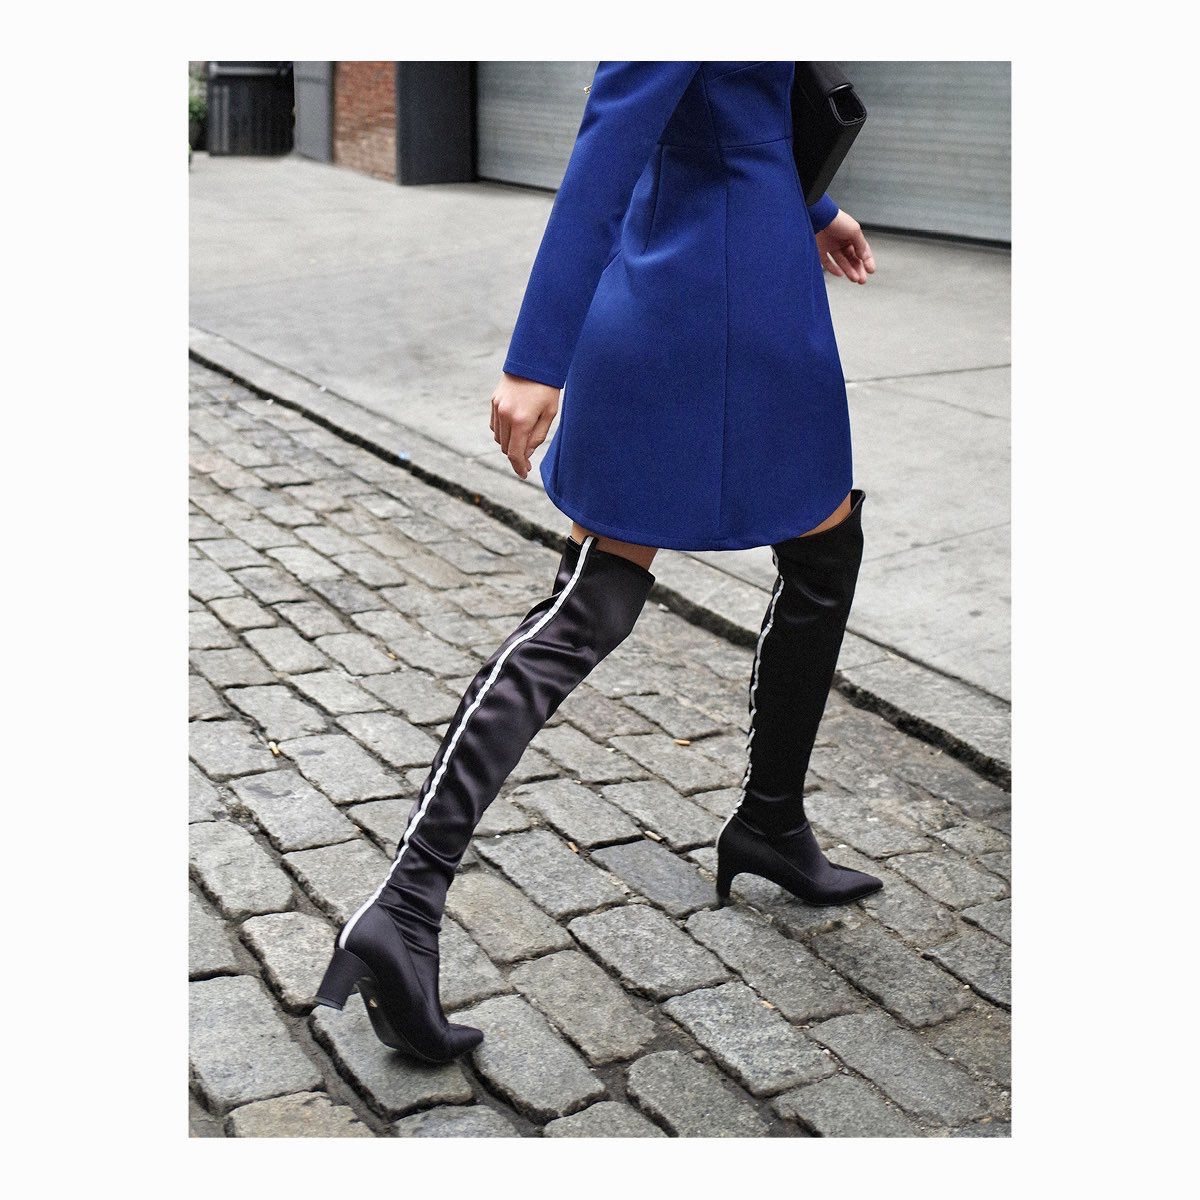 ⚡️New York City Girl⚡️
#greymer #discover #fw1819 #newcampaign #shoes #cuissardes #stylish #dreaming #newcollection #walkinginnyc #nyfw #NYC #inspiration #mfw #pfw #walkonby
Buy now on greymer.it